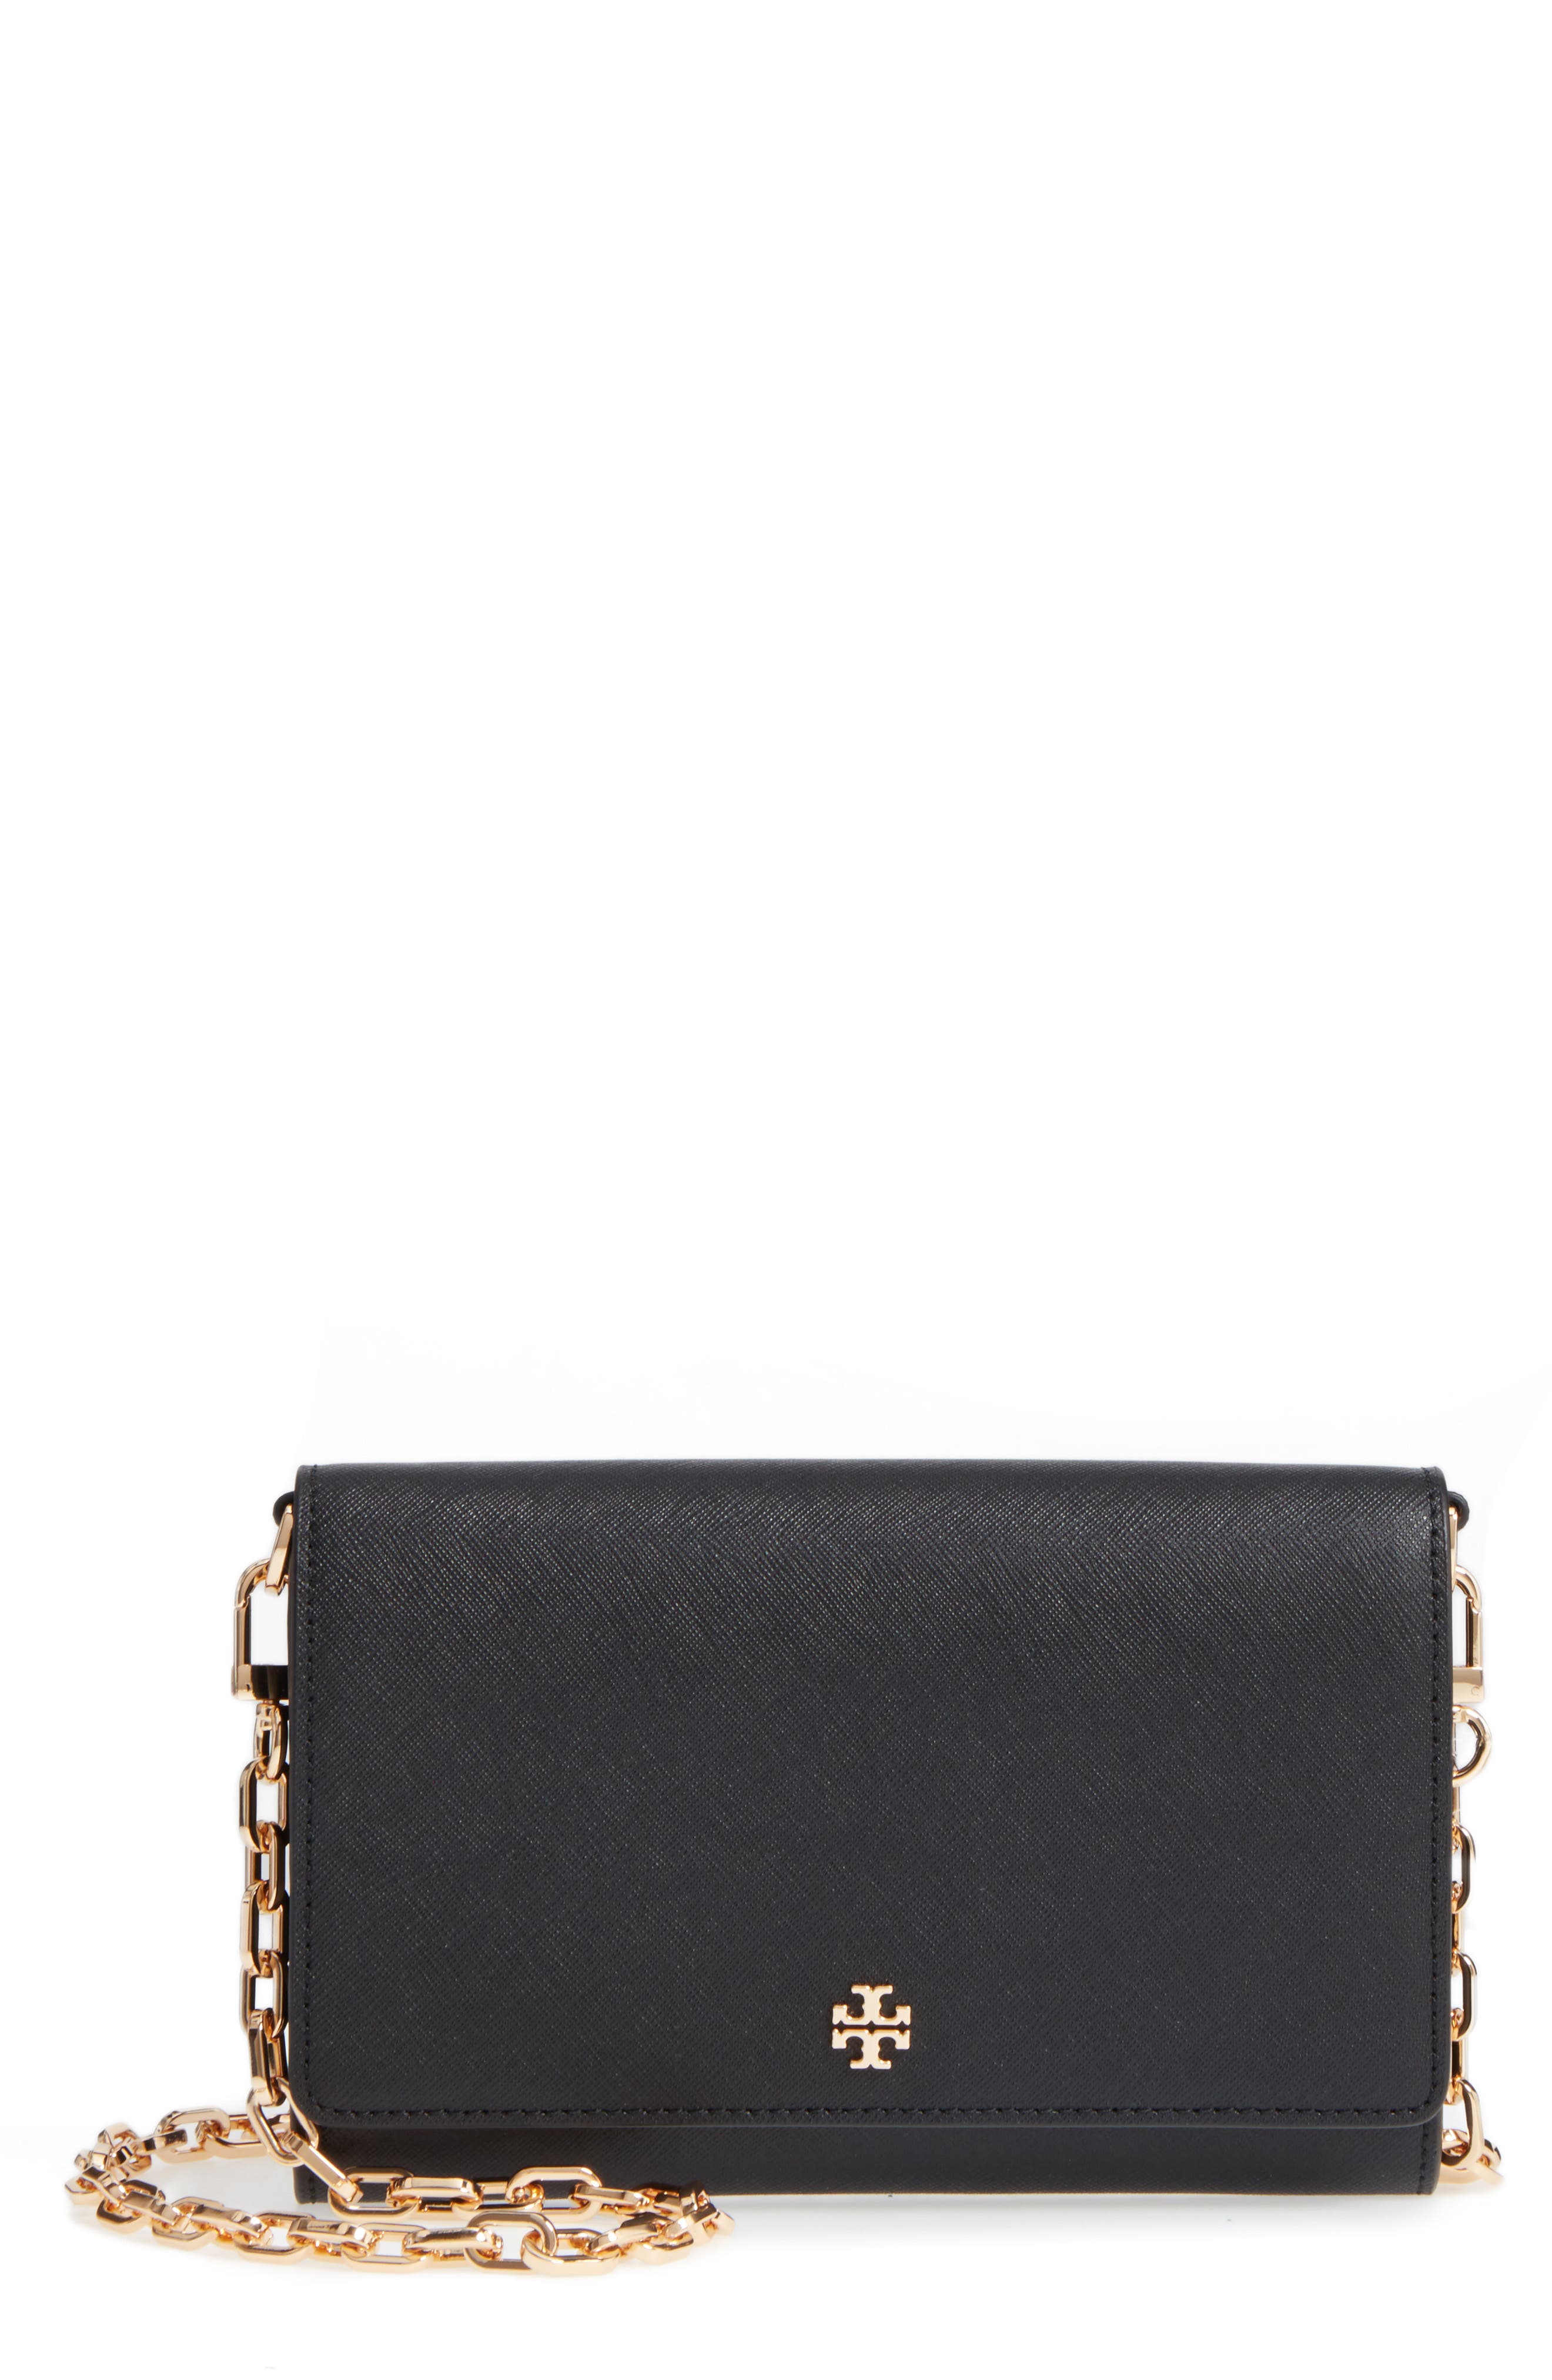 Tory Burch 'Robinson' Leather Wallet on 